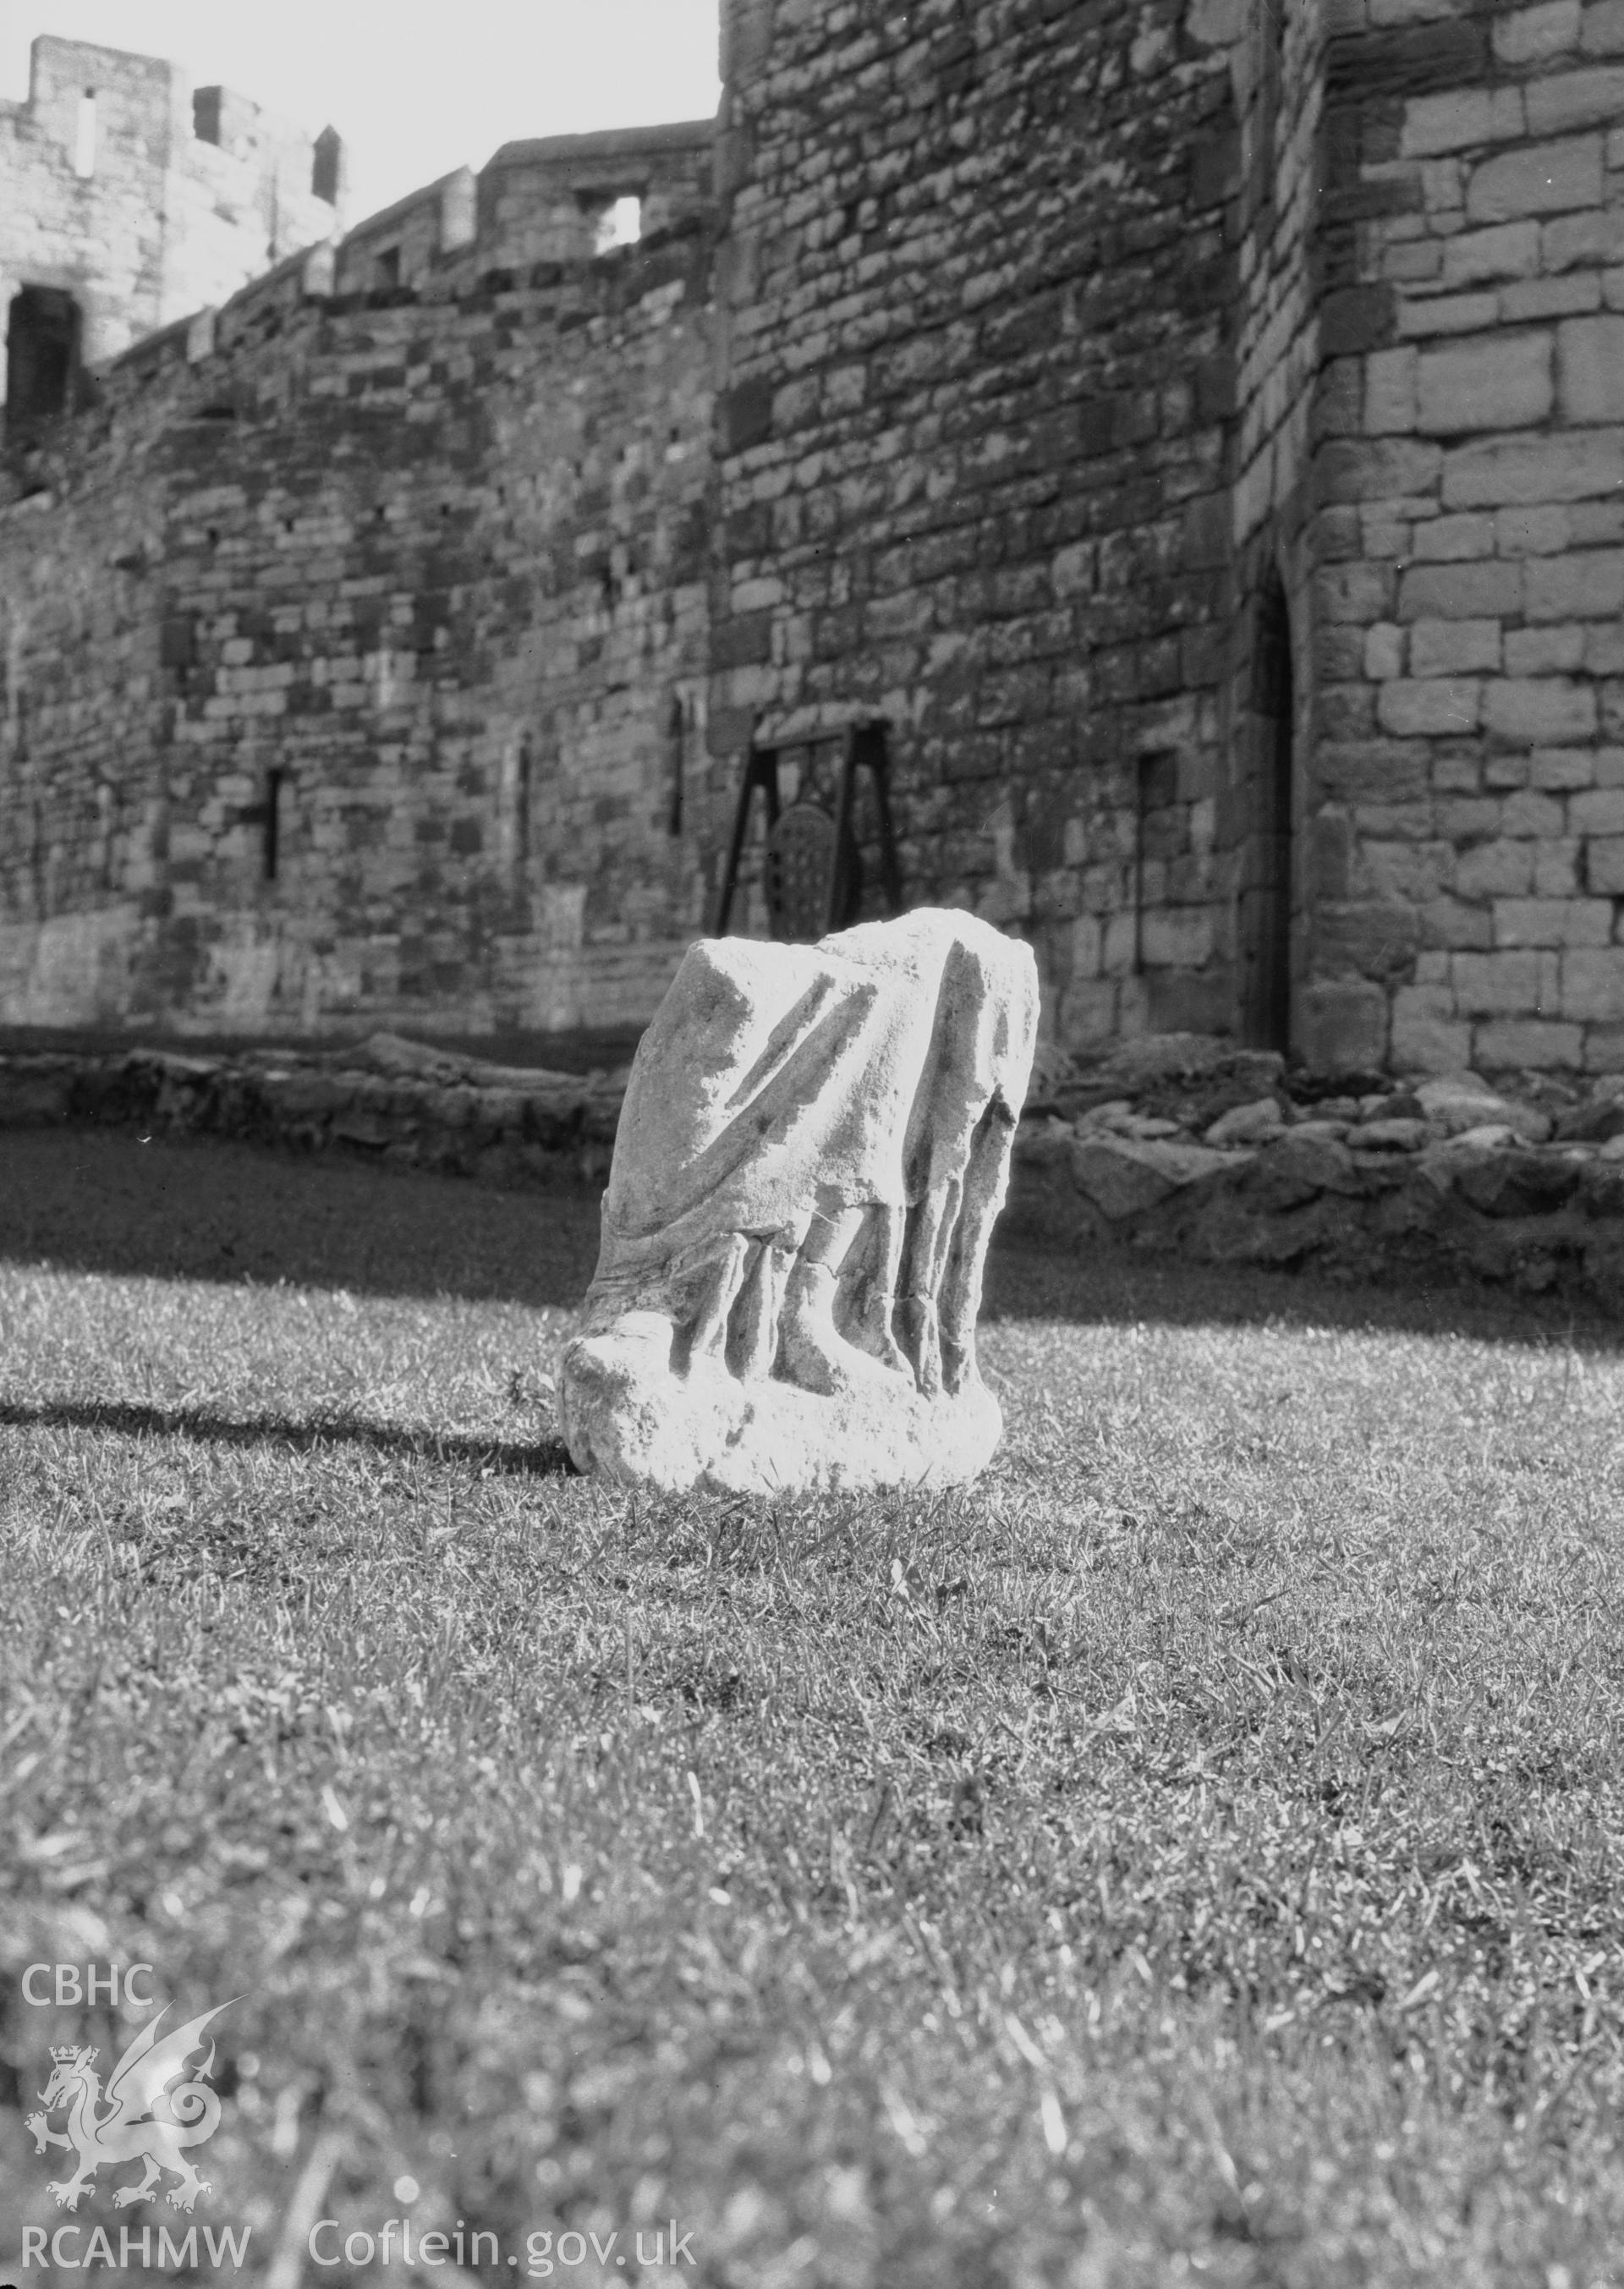 View of stone find on the lawn in front of Caernarfon Castle, Llanbeblig, taken 01.01.1956.